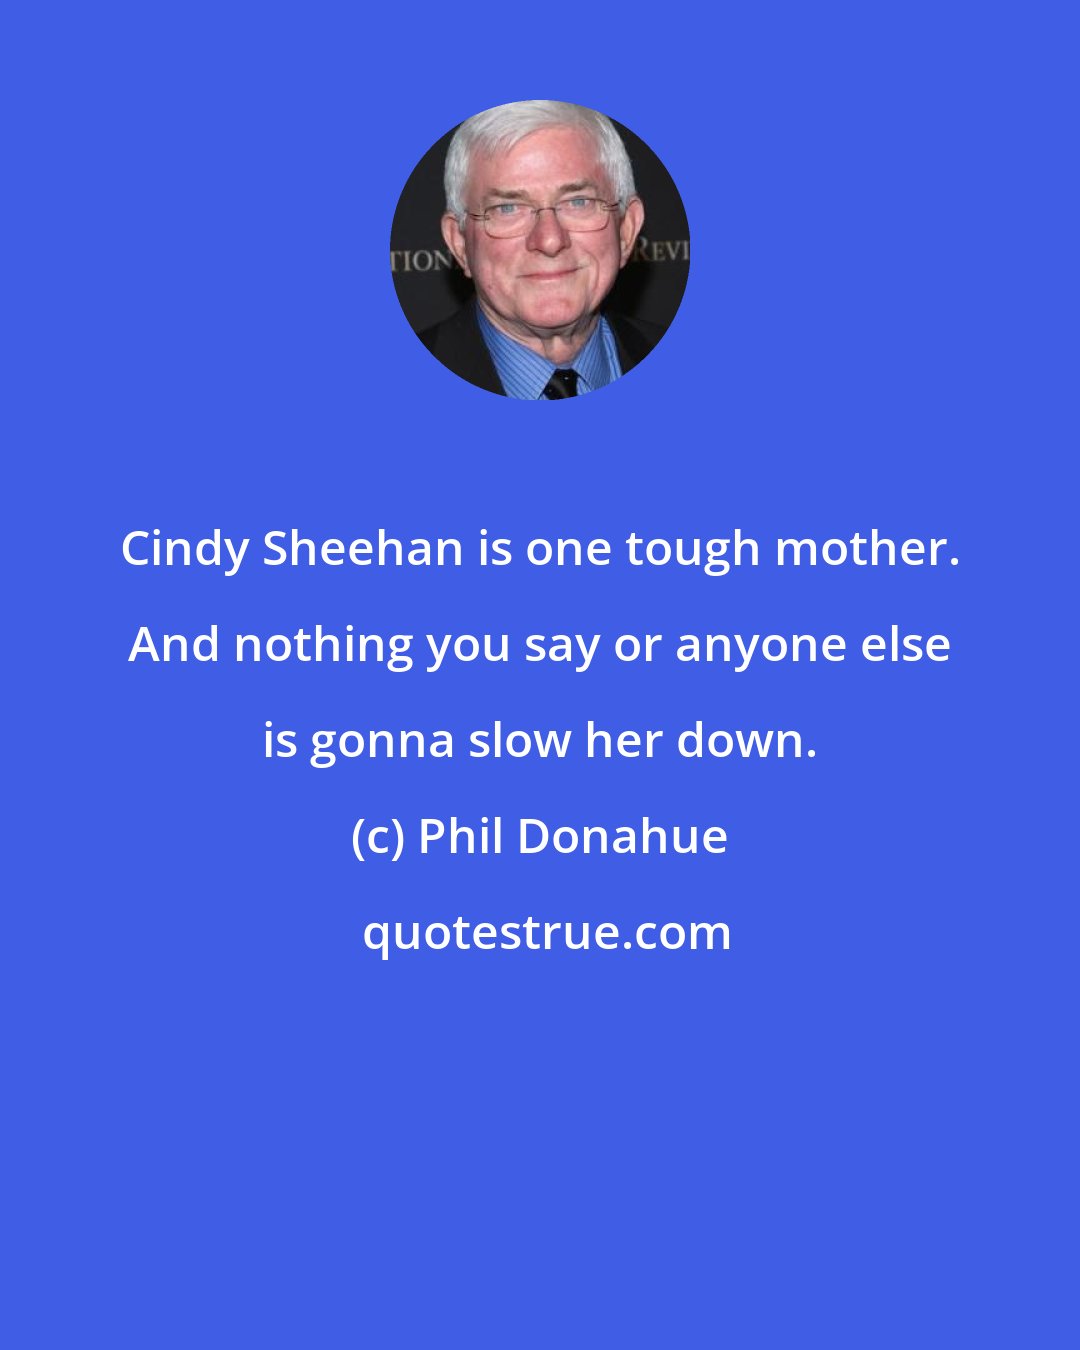 Phil Donahue: Cindy Sheehan is one tough mother. And nothing you say or anyone else is gonna slow her down.